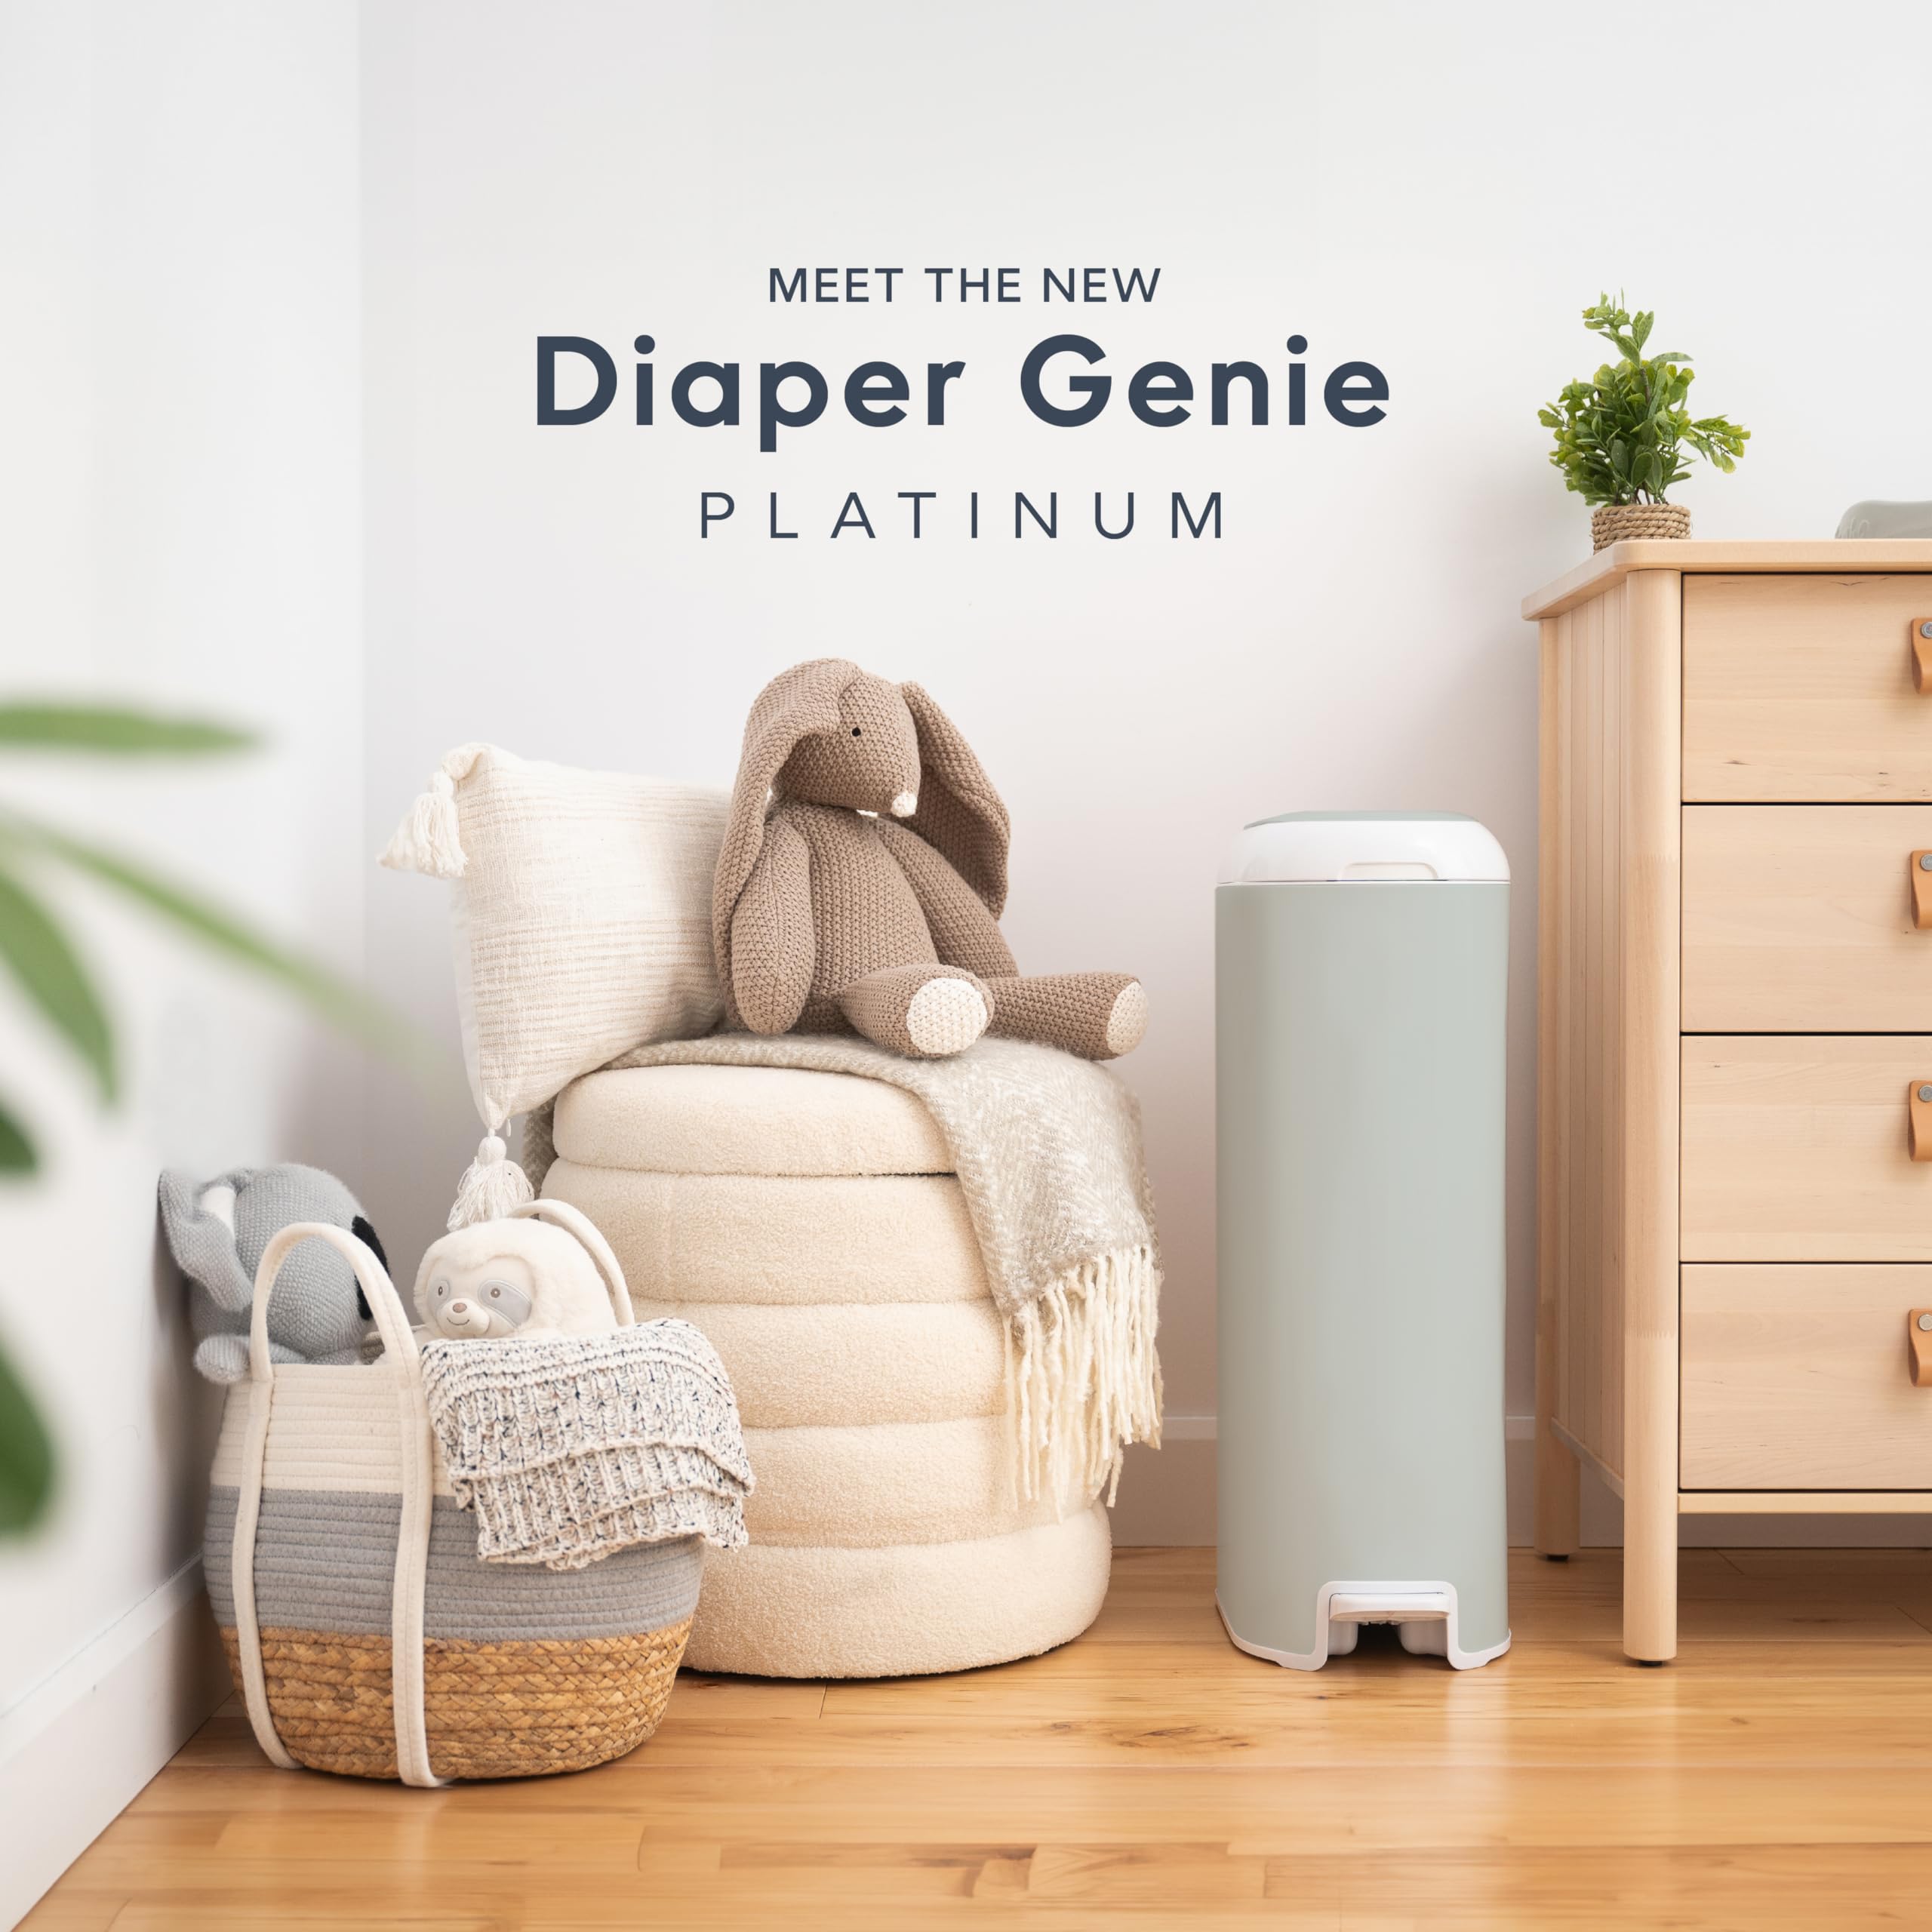 Diaper Genie Platinum Pail (Sage Green) is Made in Durable Stainless Steel and Includes 1 Easy Roll Refill with 18 Bags That can Last up to 5 Months.